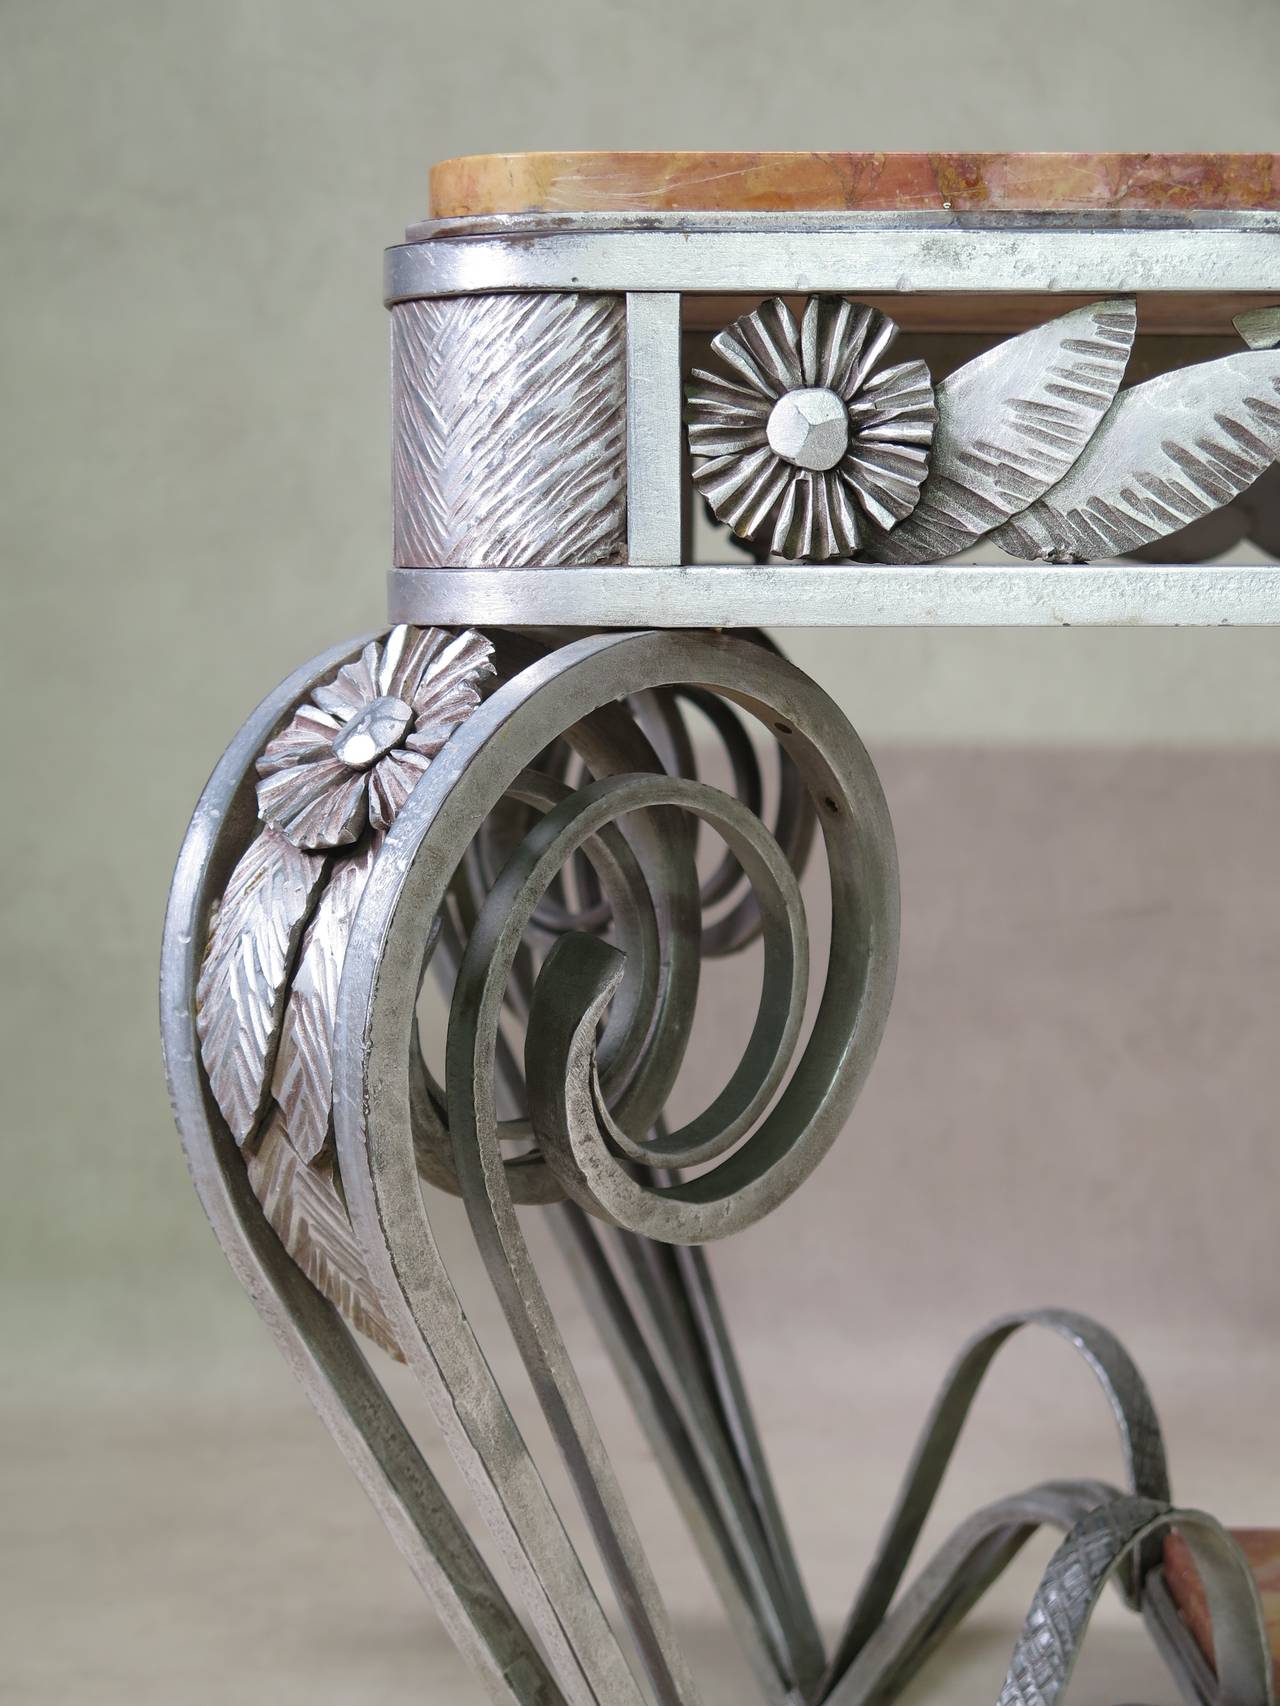 French Art Deco Wrought Iron and Marble 